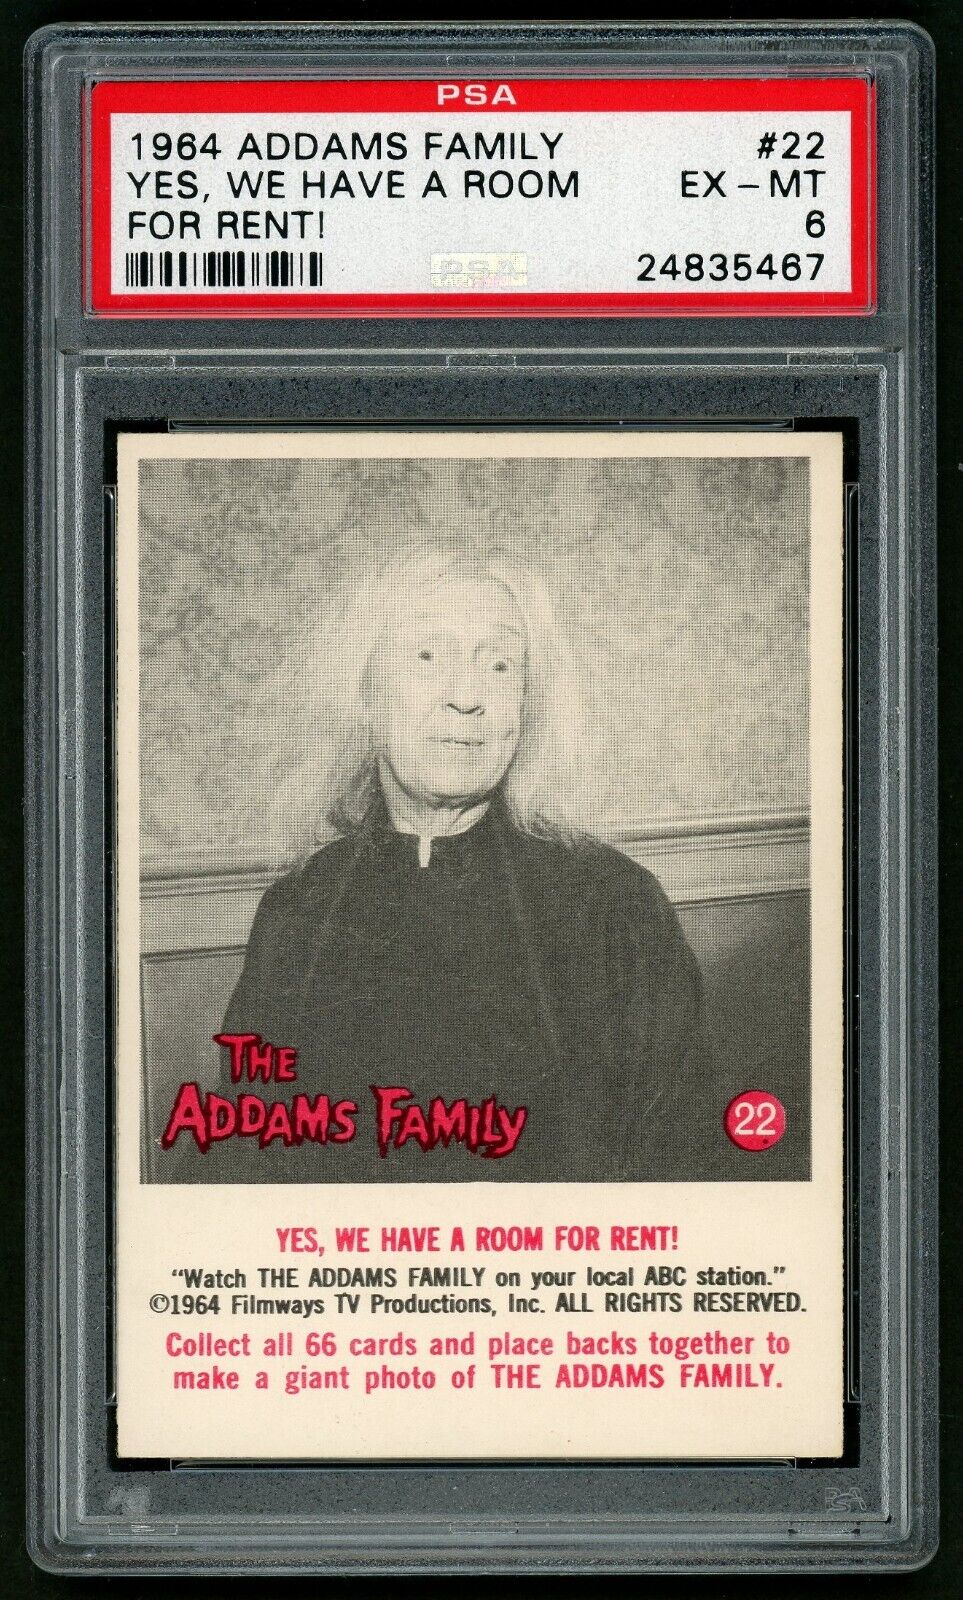 1964 Donruss The Addams Family Card #22 Yes, We Have A Room For Rent PSA 6